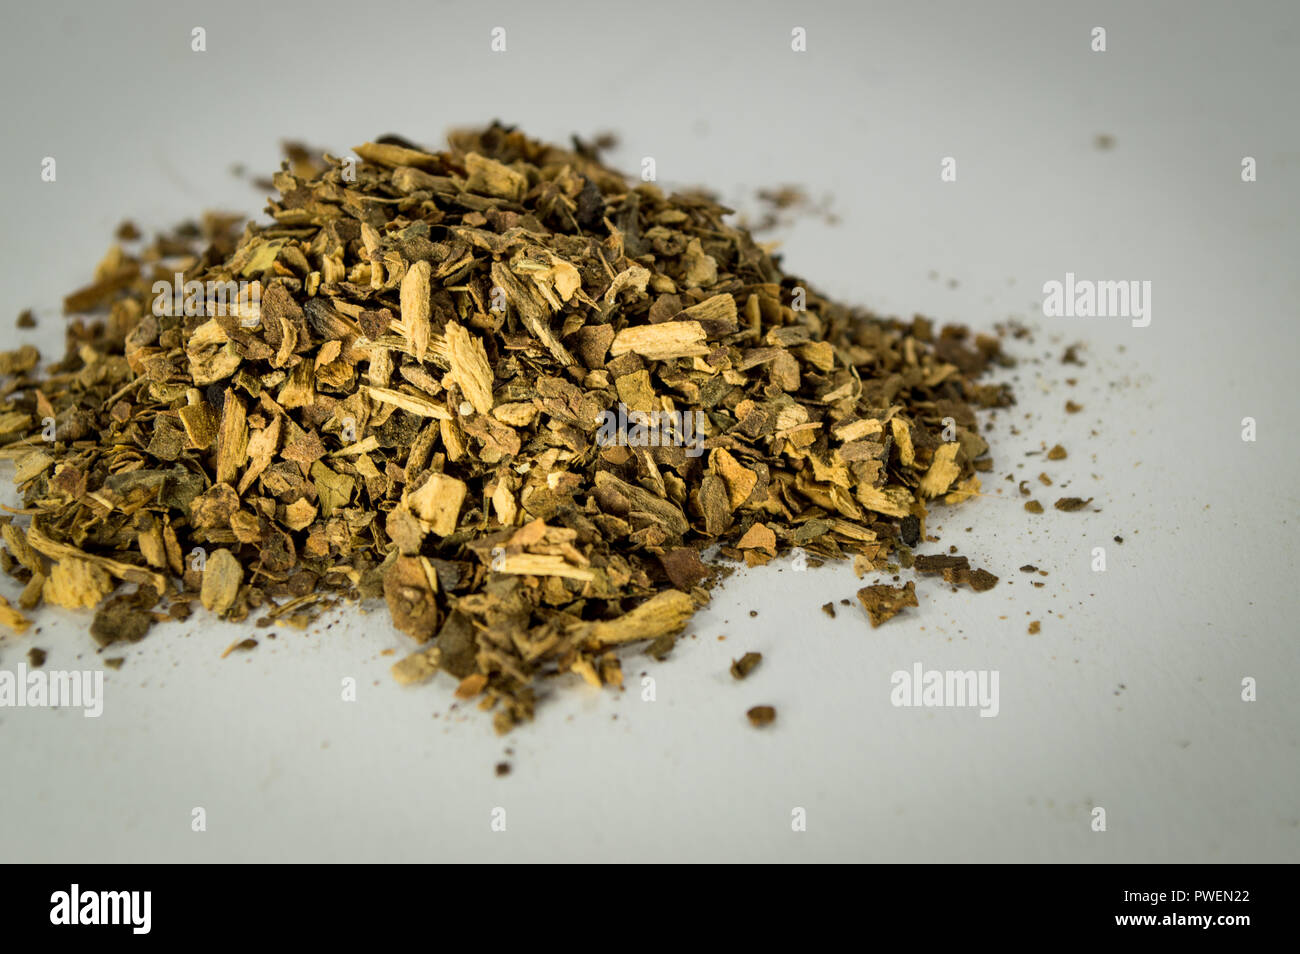 Loose shredded tobacco isolated. Stock Photo